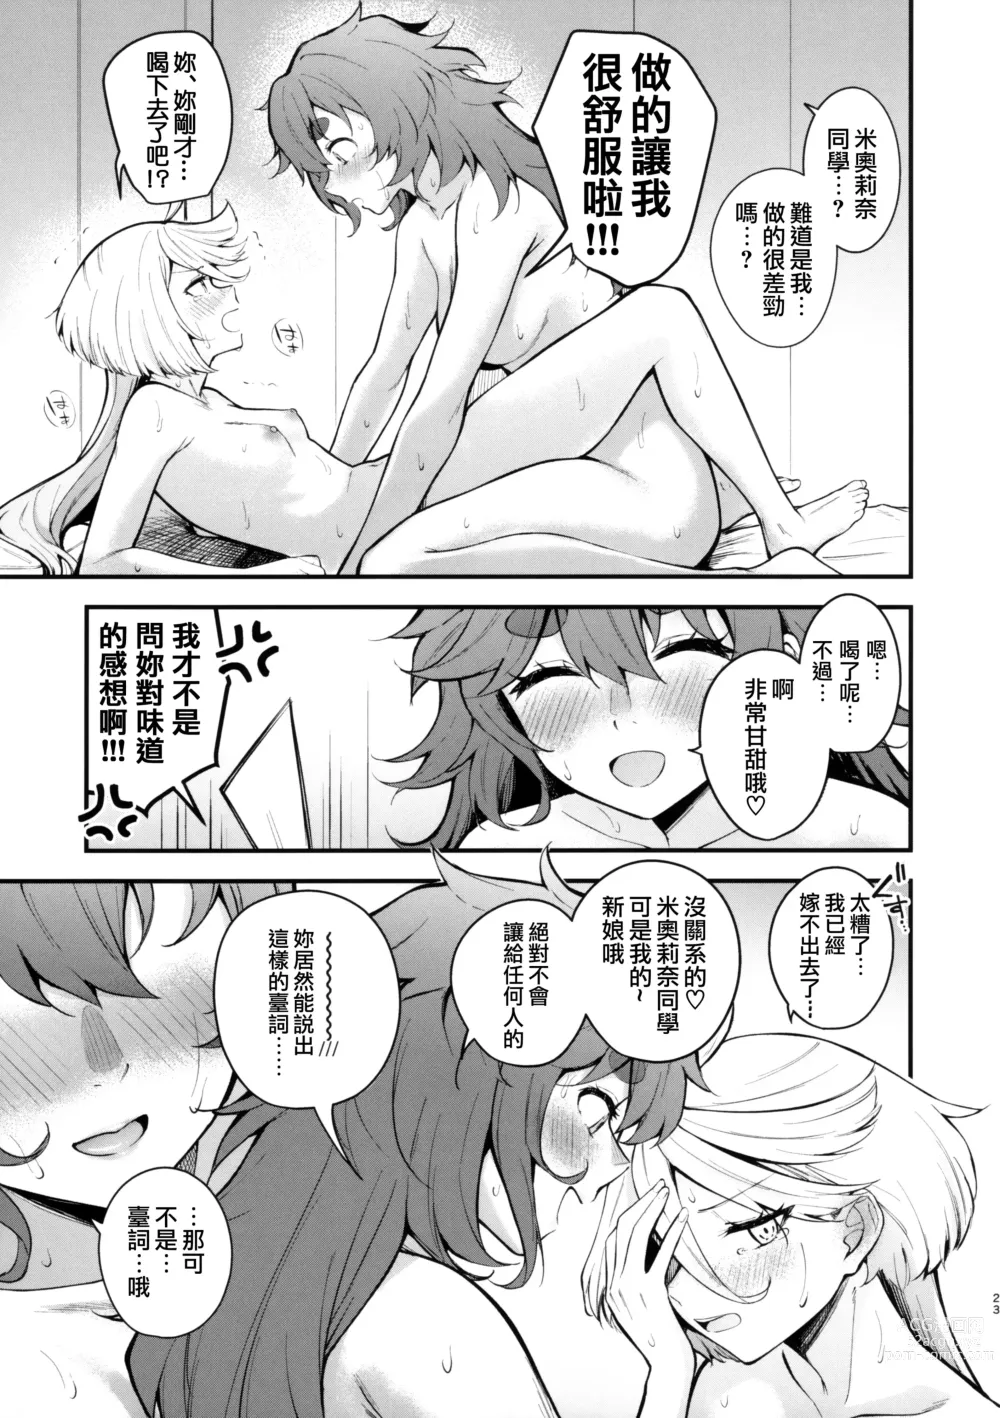 Page 23 of doujinshi 我的可爱新娘大人